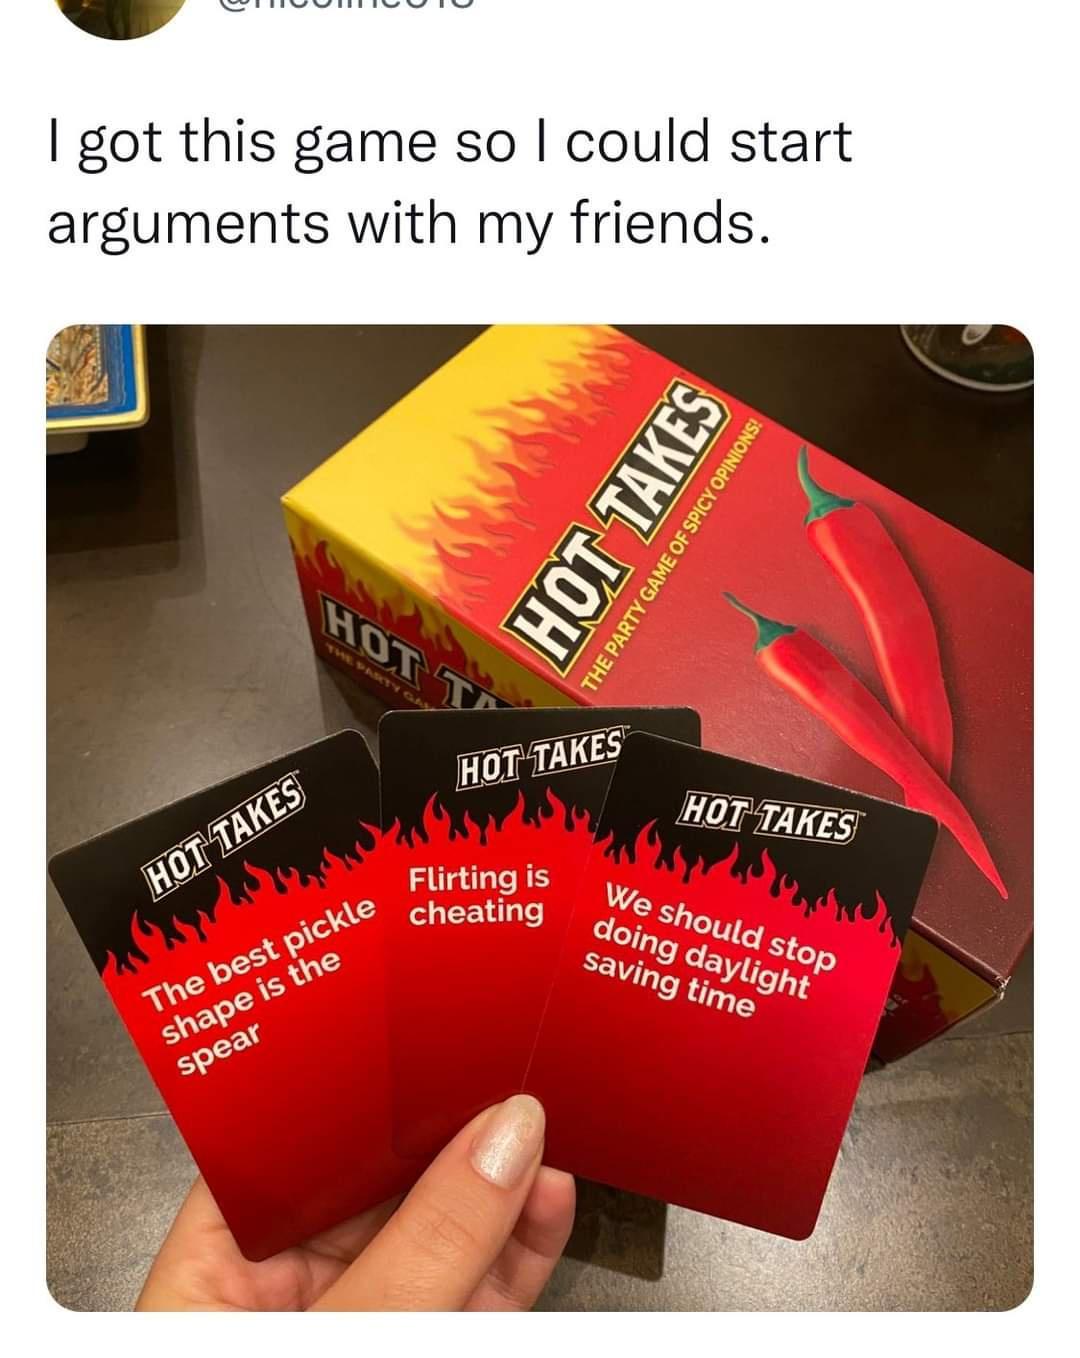 dank memes - hot takes game - I got this game so I could start arguments with my friends. Hot Takes Hot T The best pickle shape is the spear Hot Takes Flirting is cheating Hot Takes The Party Game Of Spicy Opinions! Hot Takes We should stop doing daylight